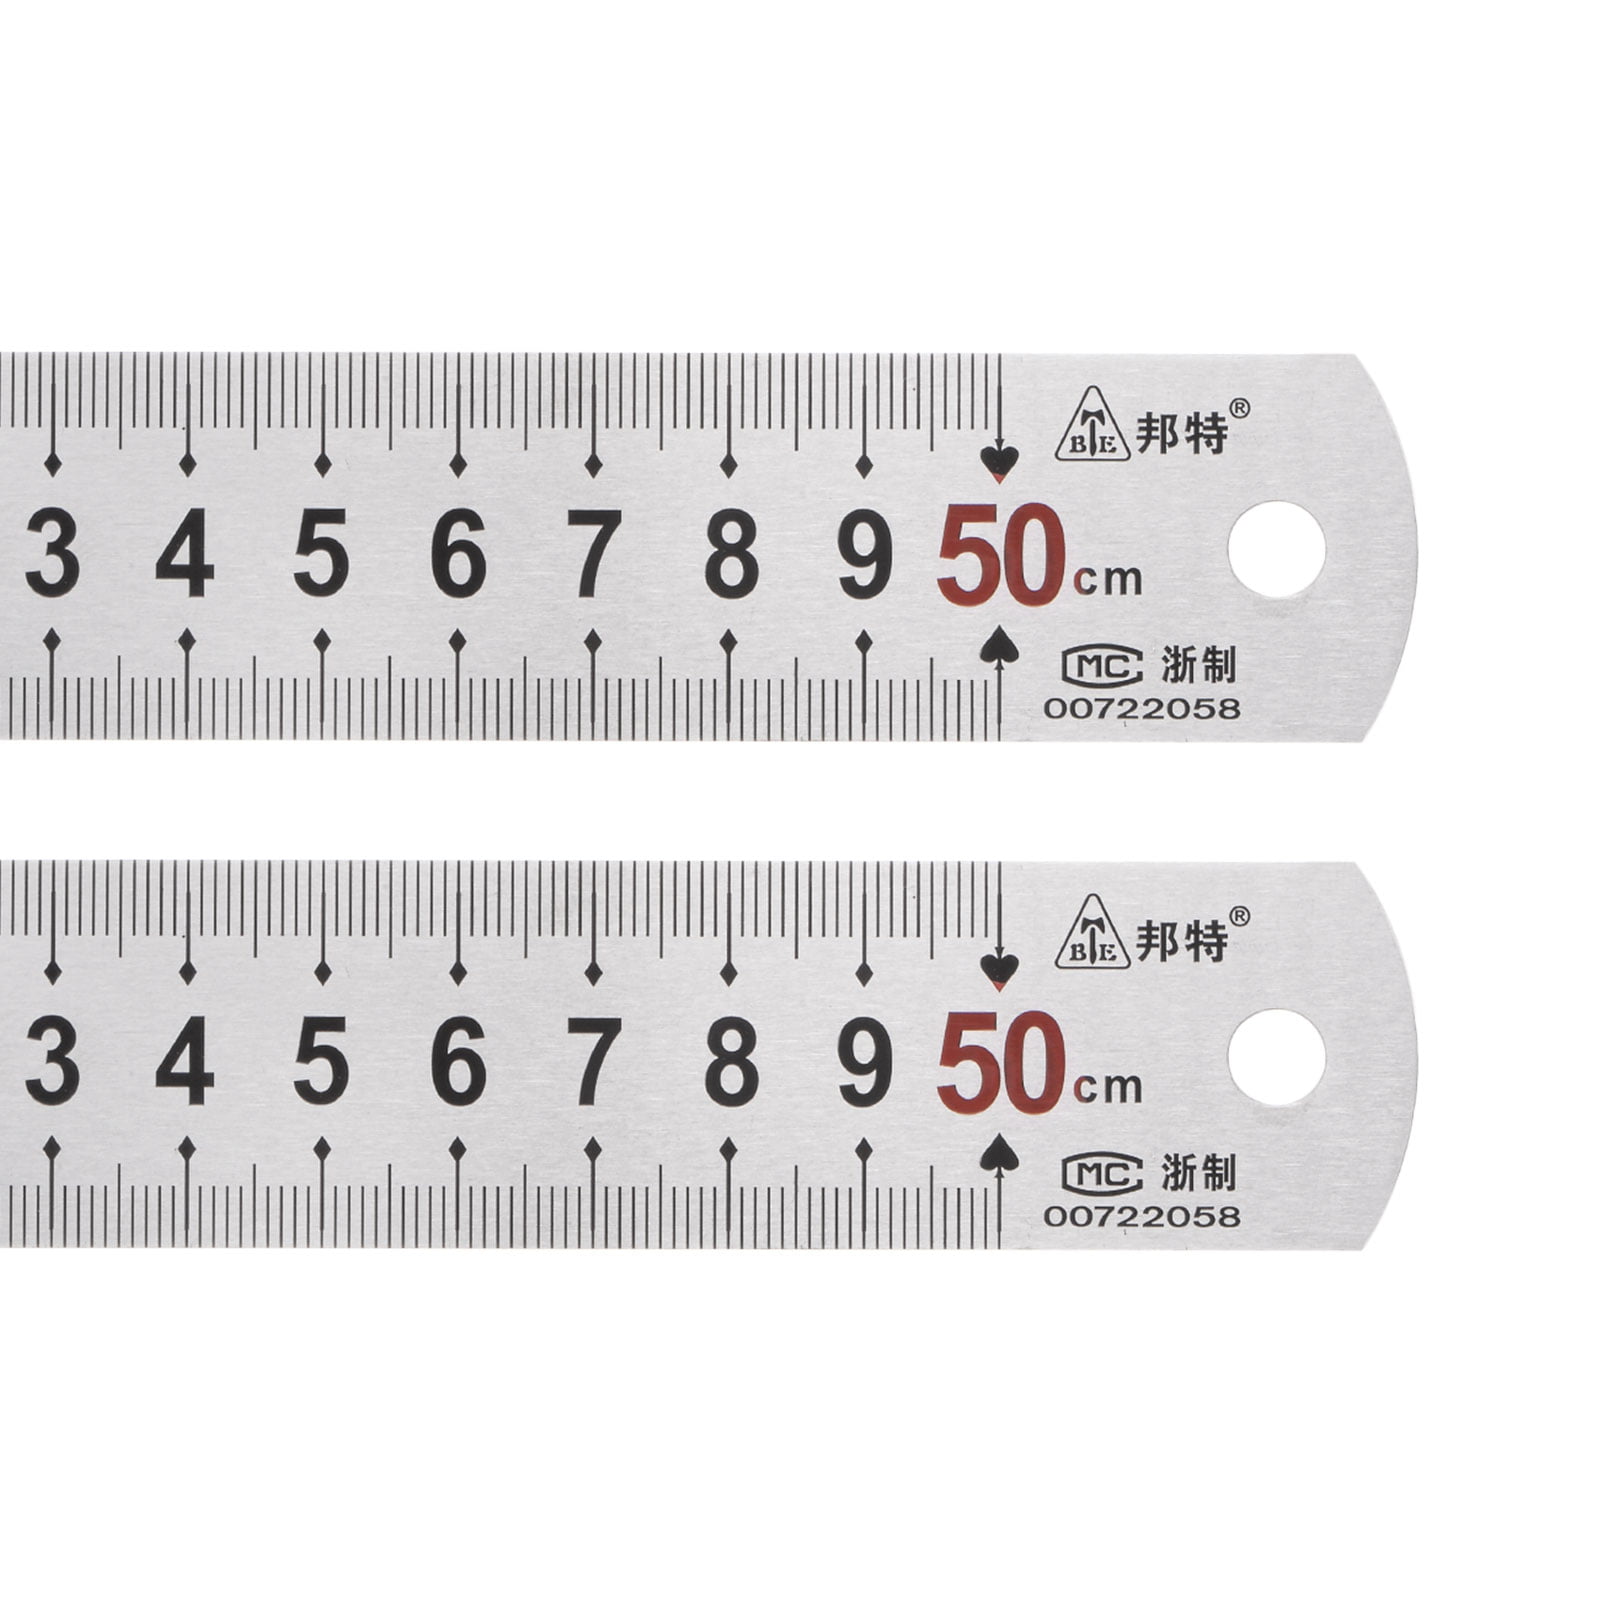 6'' / 8 / 12 SCALE RULER SMALL/LARGE Measure Rule Metal Stainless Steel  30cm